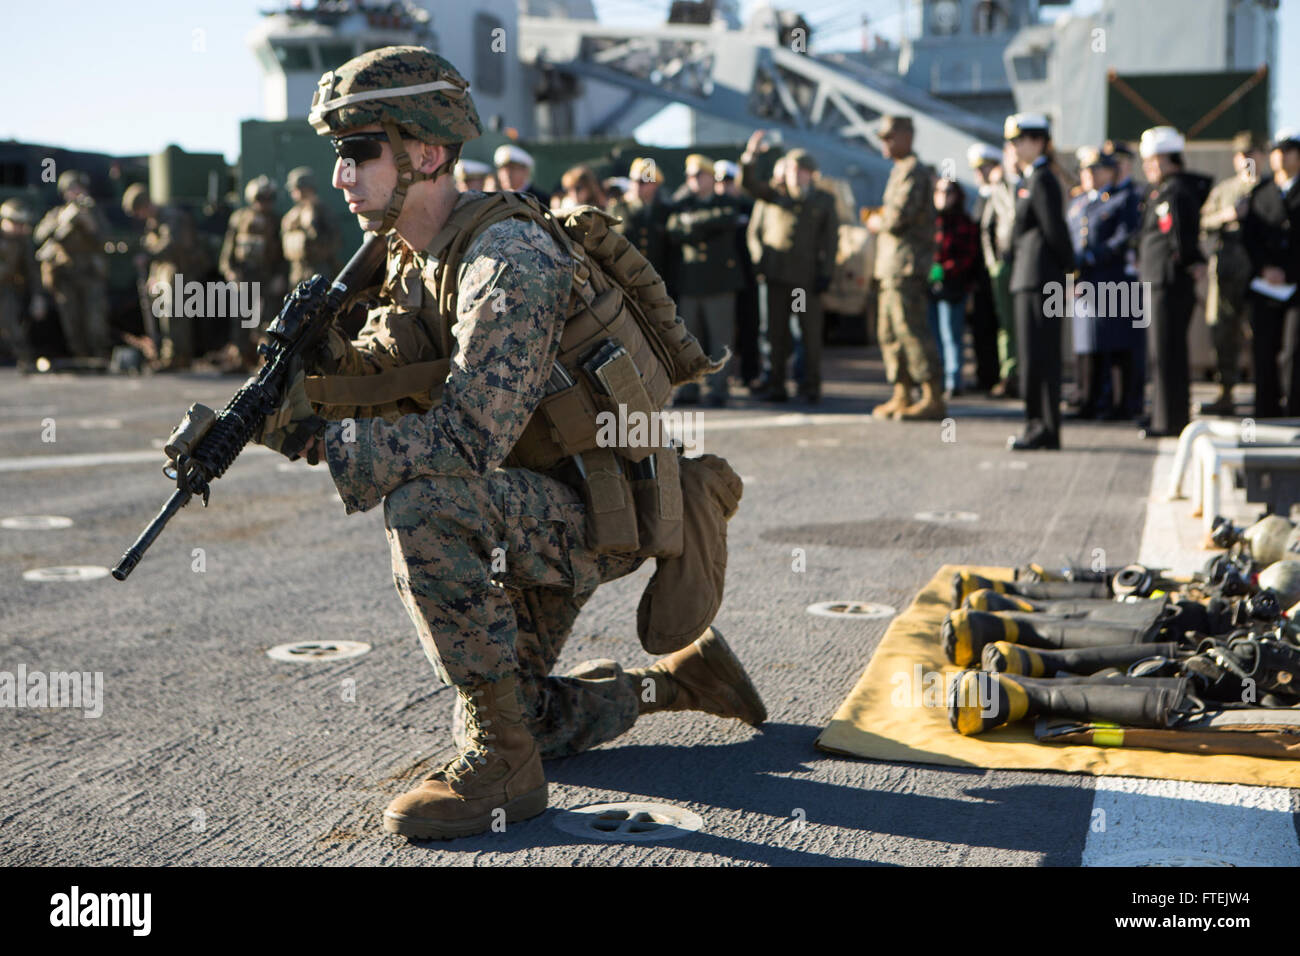 VALENCIA, Spain (Dec. 31, 2014) Cpl. Fabaino E. Tornberg, a machine gunner with Battalion Landing Team 3rd Battalion, 6th Marine Regiment, 24th Marine Expeditionary Unit, conducts a tactical halt during a tactics demonstration for Spanish government and military officials aboard USS Fort McHenry (LSD 43) in Valencia, Spain, Dec. 31, 2014. The 24th MEU and Iwo Jima Amphibious Ready Group are conducting naval operations in the U.S. 6th Fleet area of operations in support of U.S. national security interests in Europe. Stock Photo